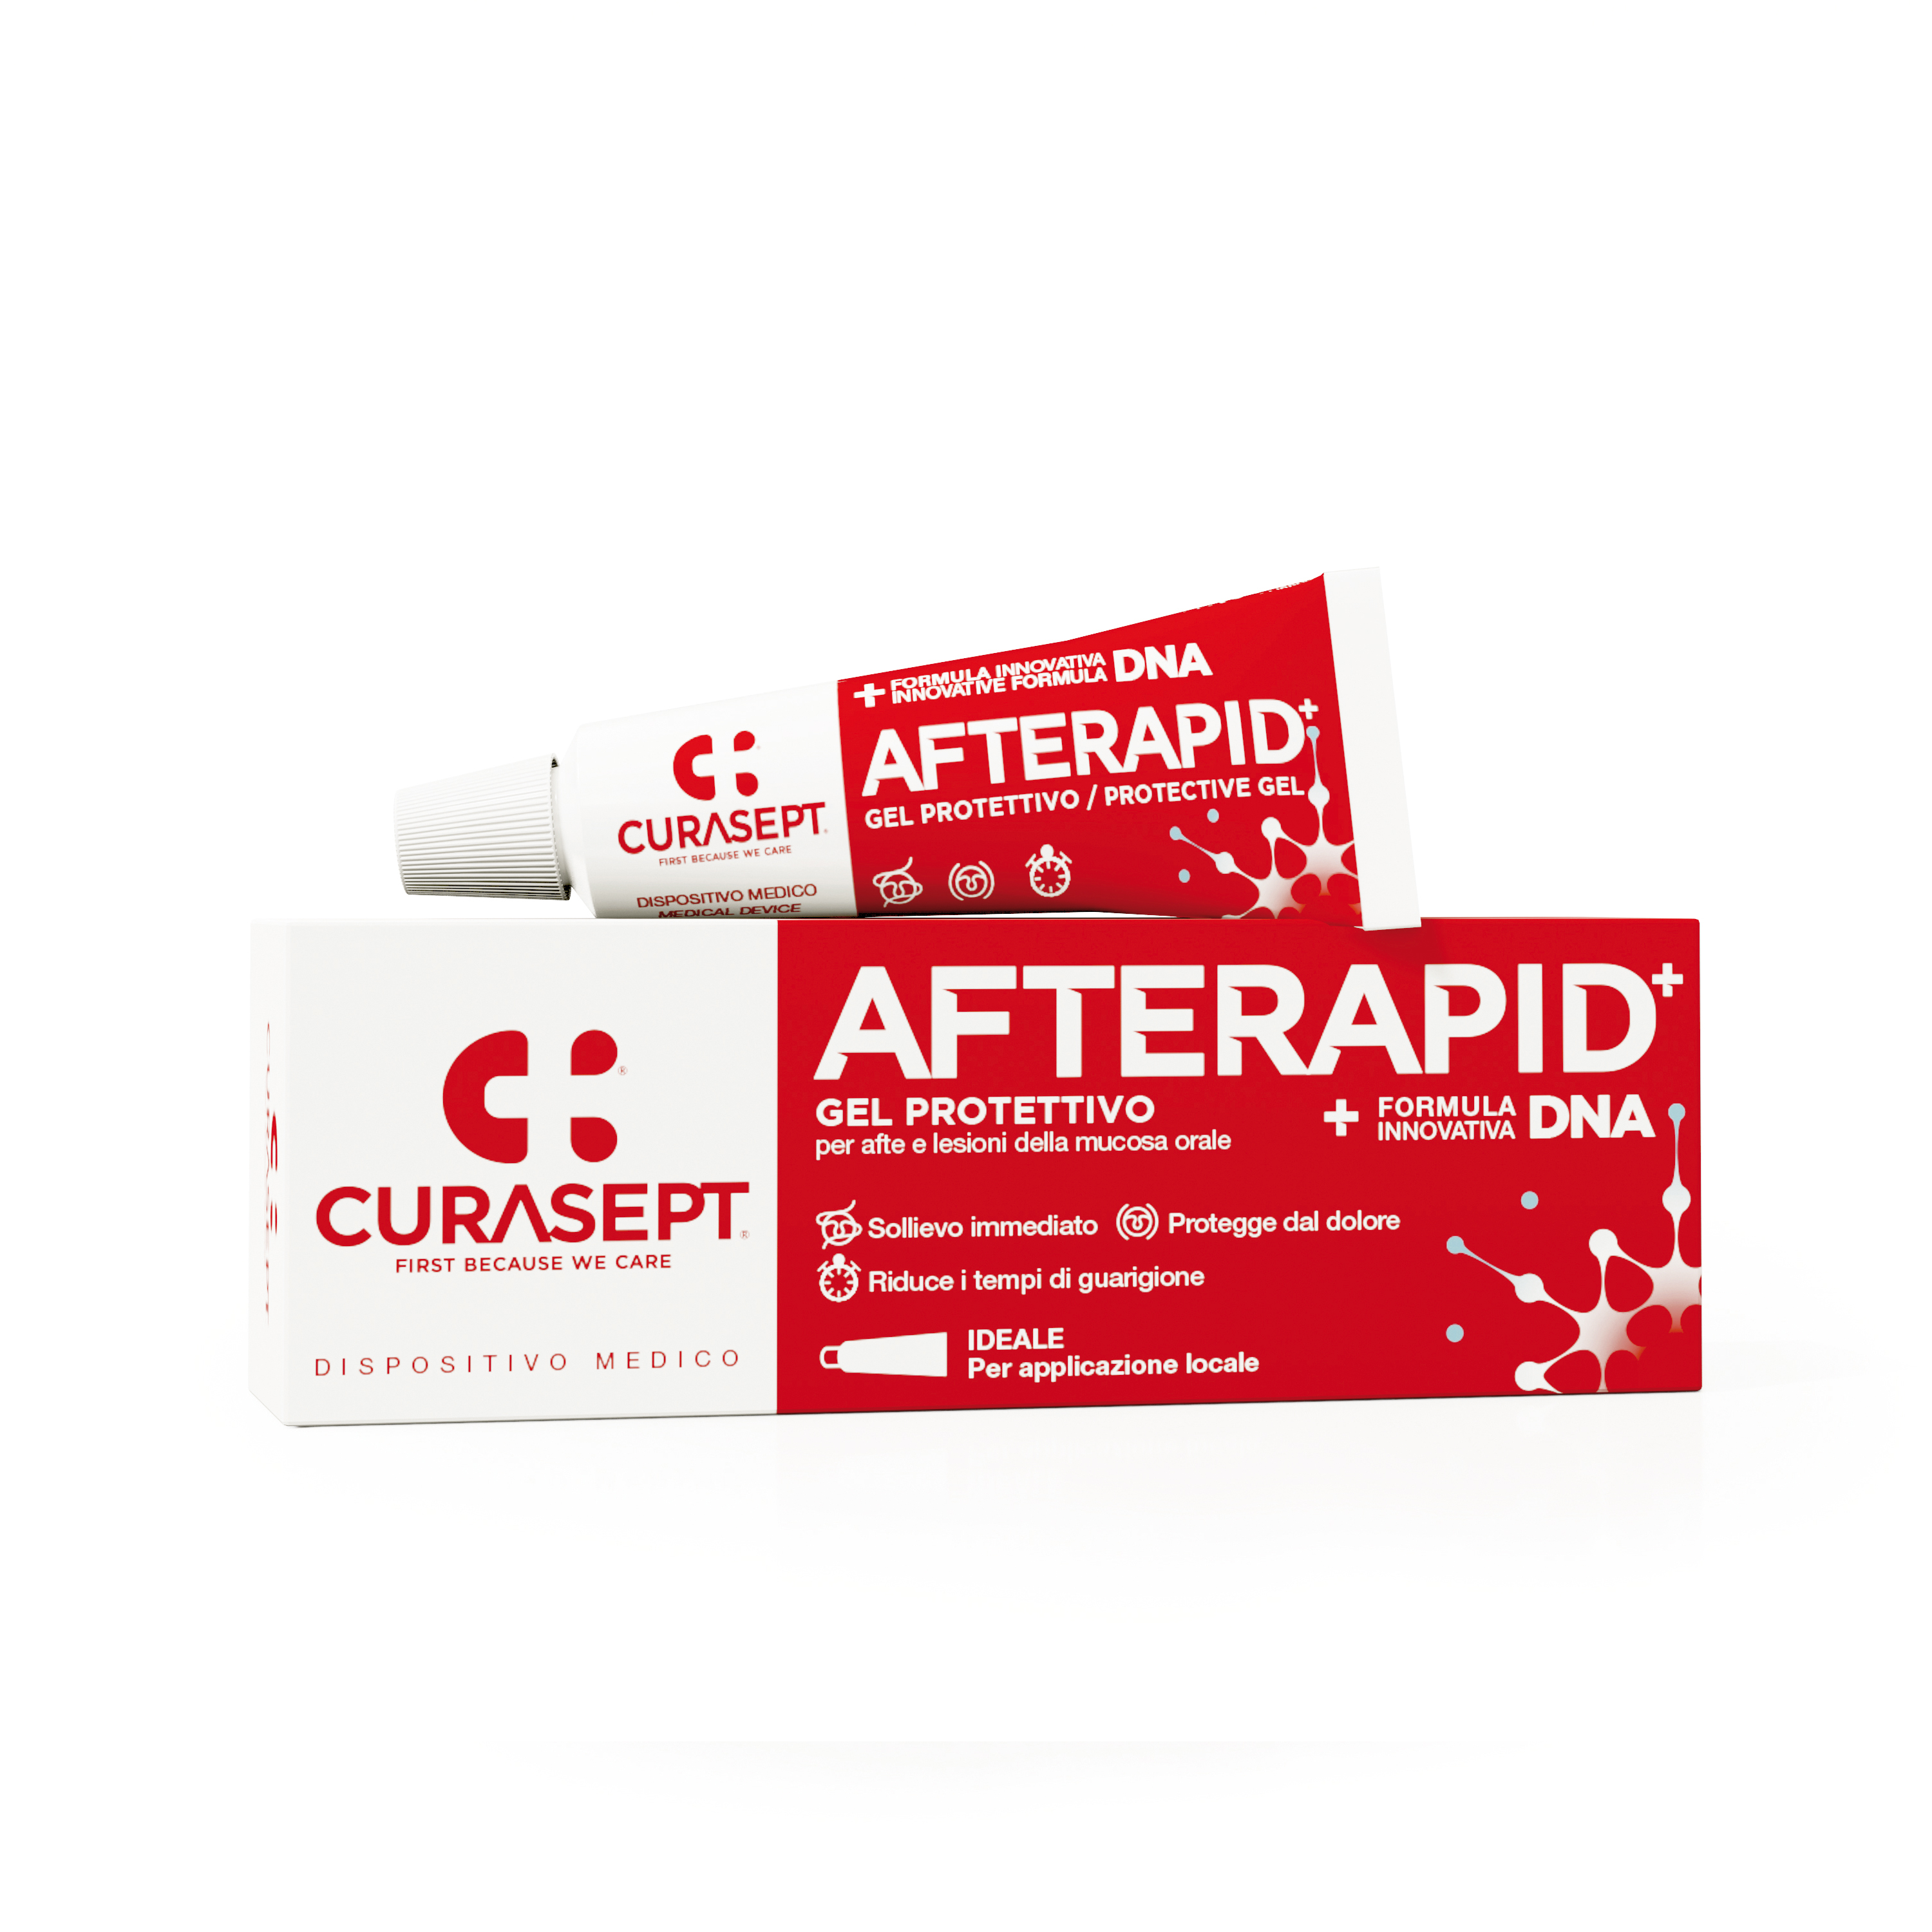 Curasept Afte Rapid DNA Gel Protettivo ml 1024.jpg